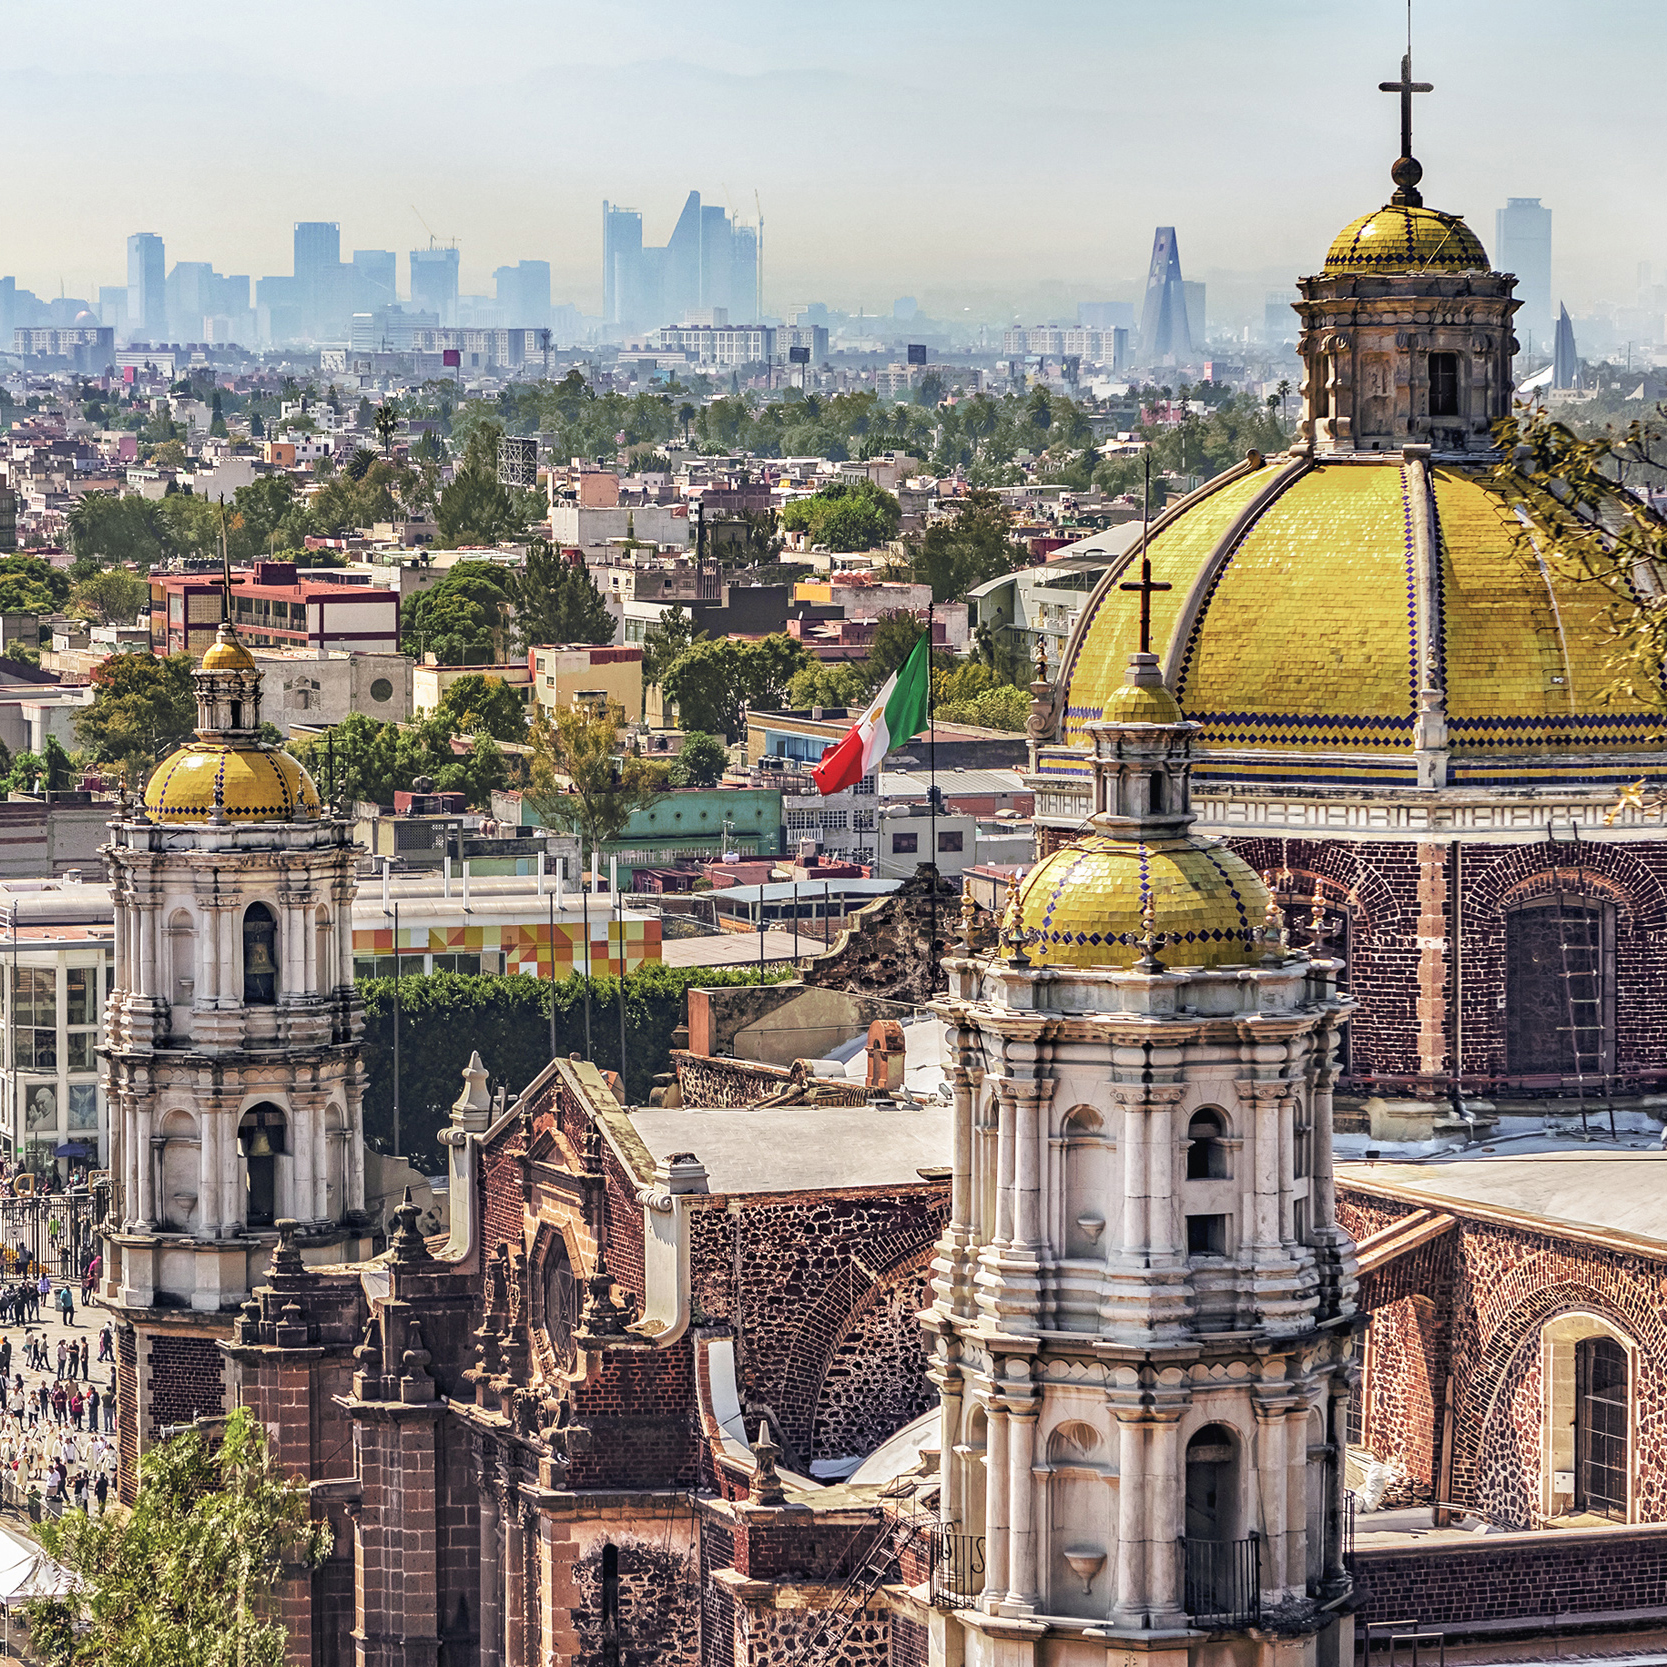 The image shows Mexico City.